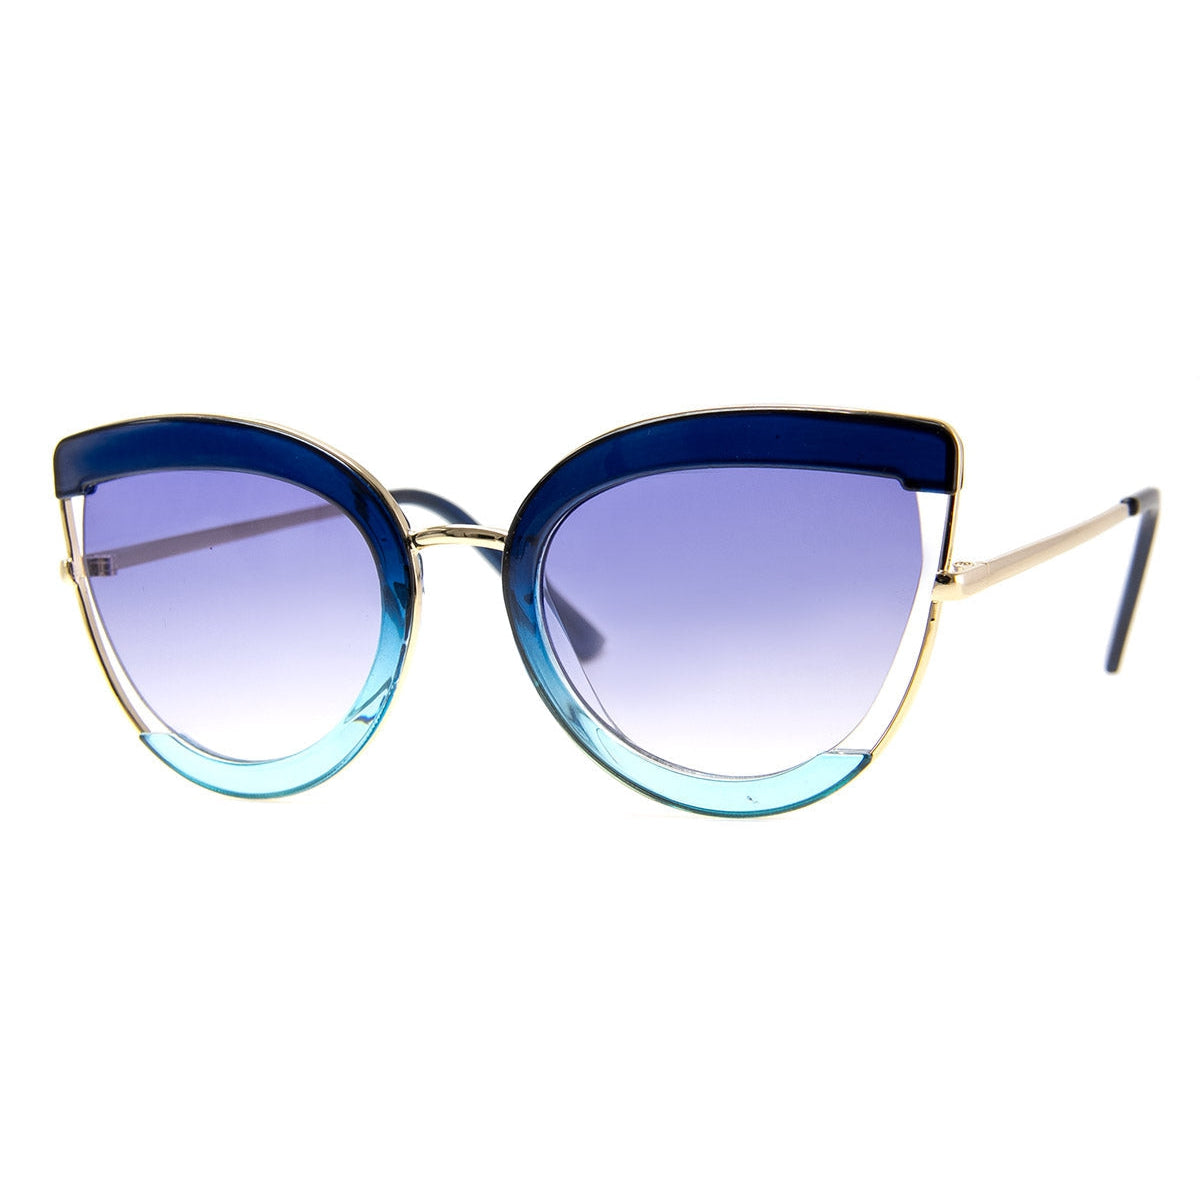 Very Special Sunglasses - Blue/Teal